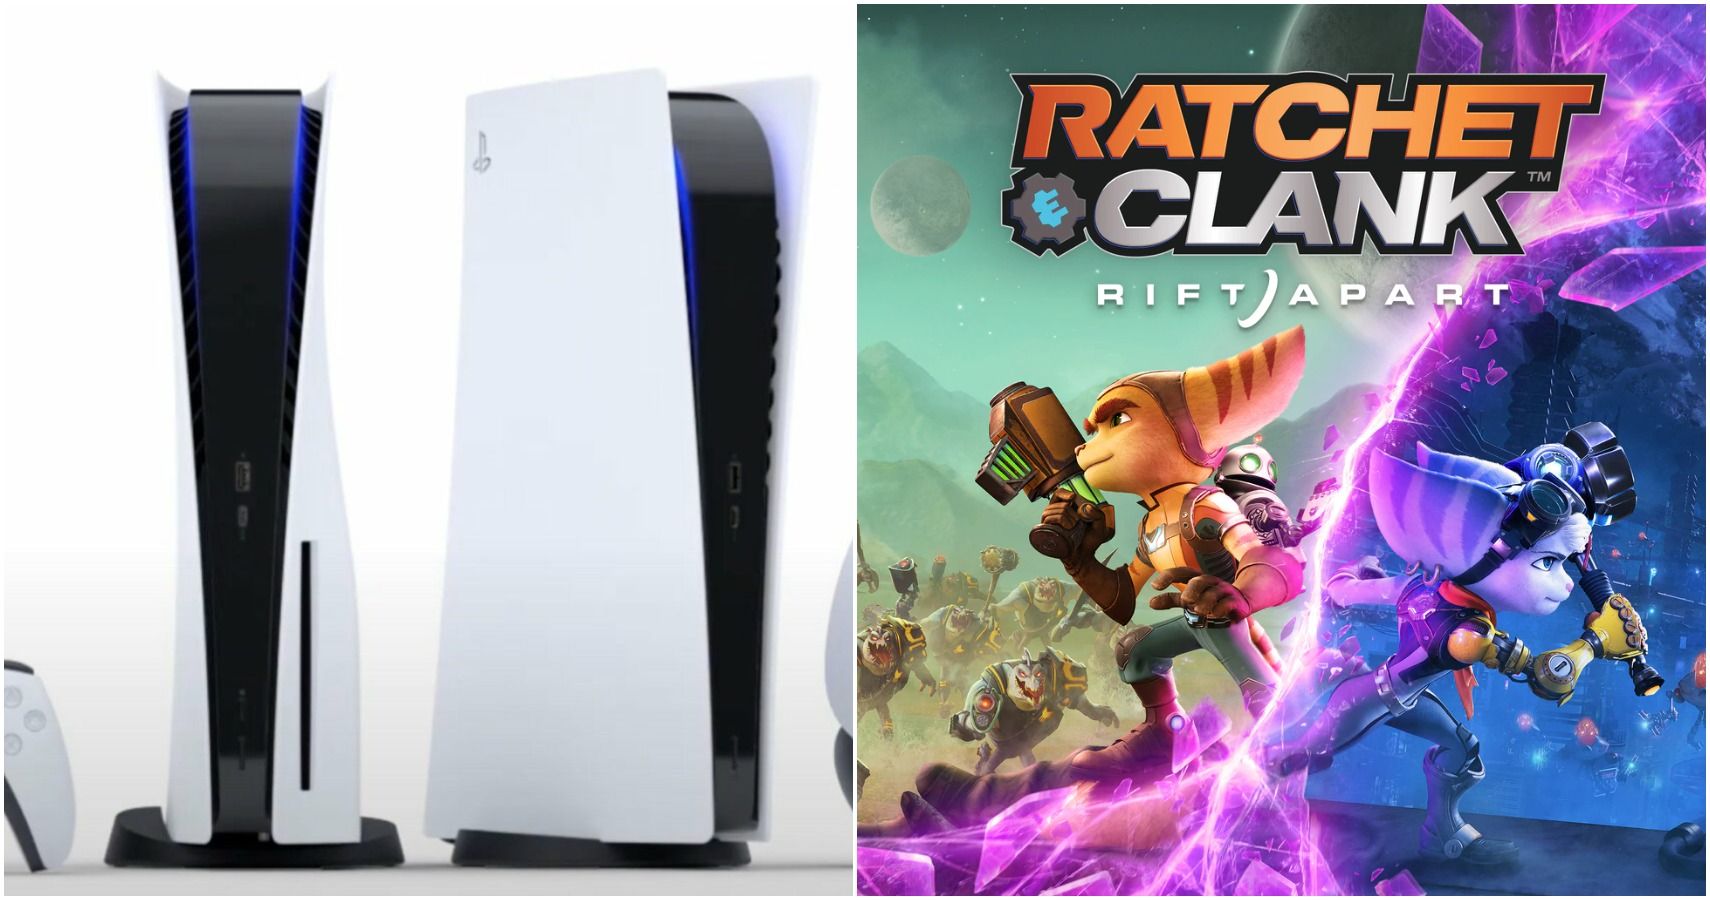 108255 1 ps5 ошибка. Ratchet and Clank ps5. Ratchet Clank: Rift Apart ps5 Screen. Ratchet Clank ps5 купить. Ce-108255-1 ps5 ошибка Ratchet and Clank.